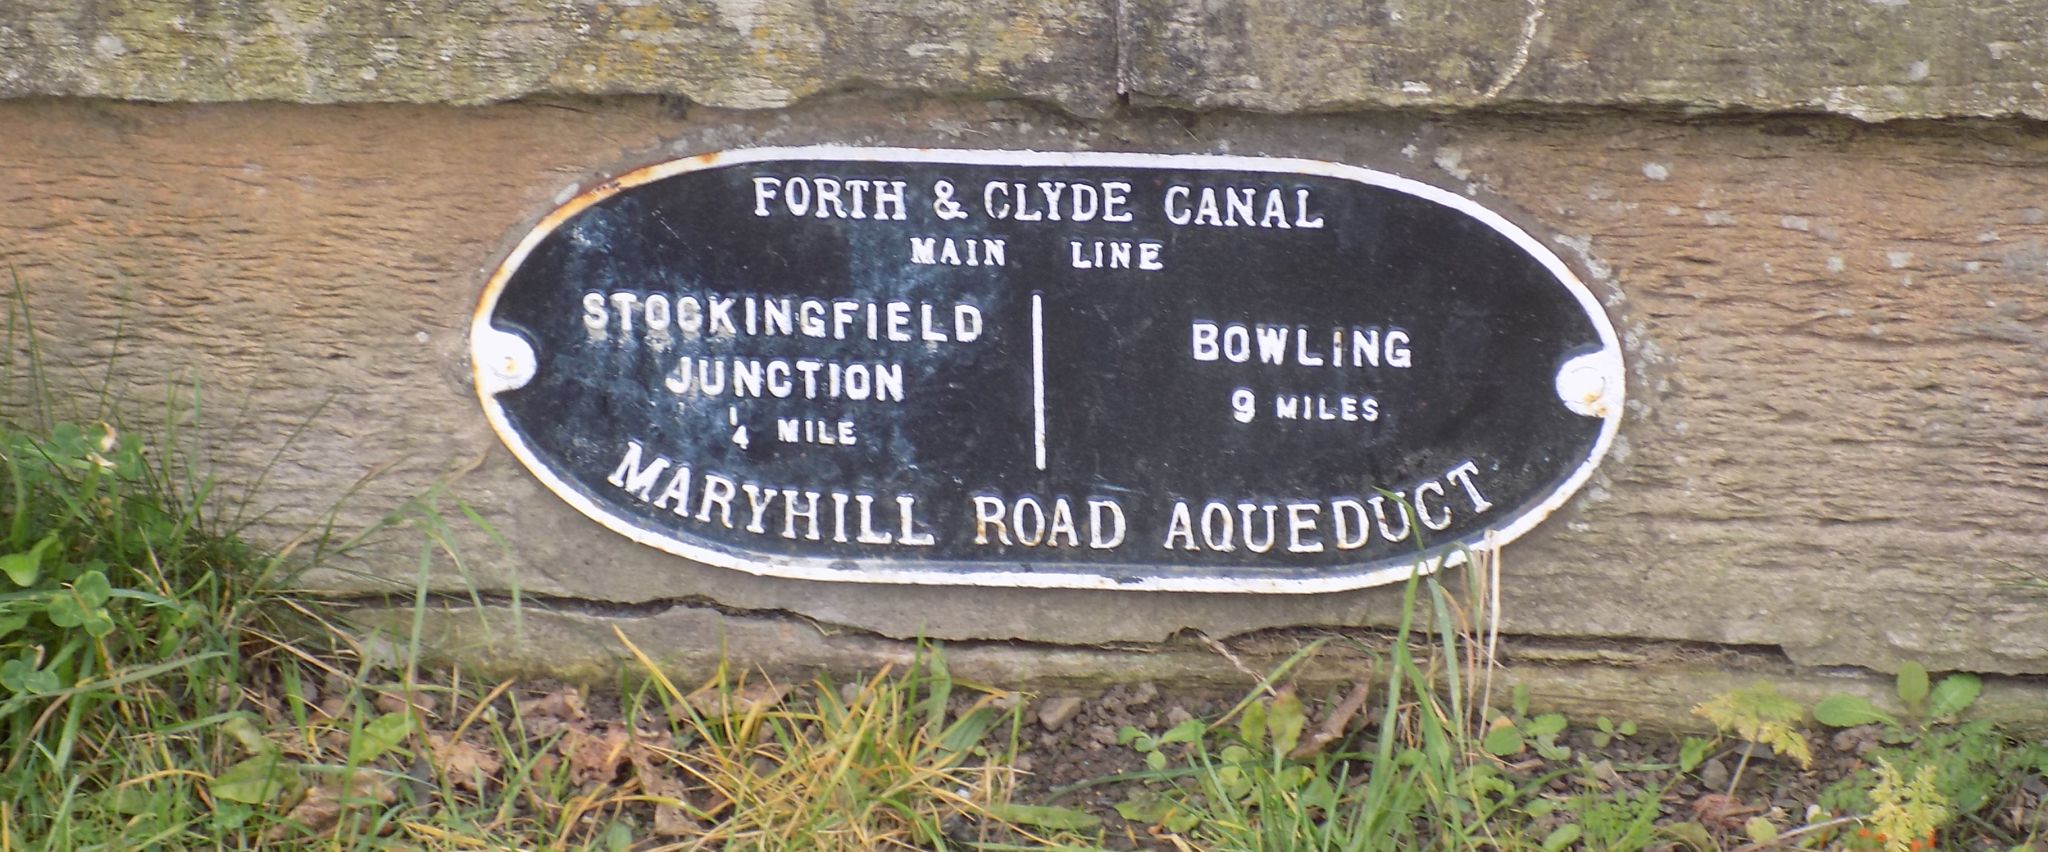 Plaque on on Maryhill Aqueduct on Forth and Clyde Canal